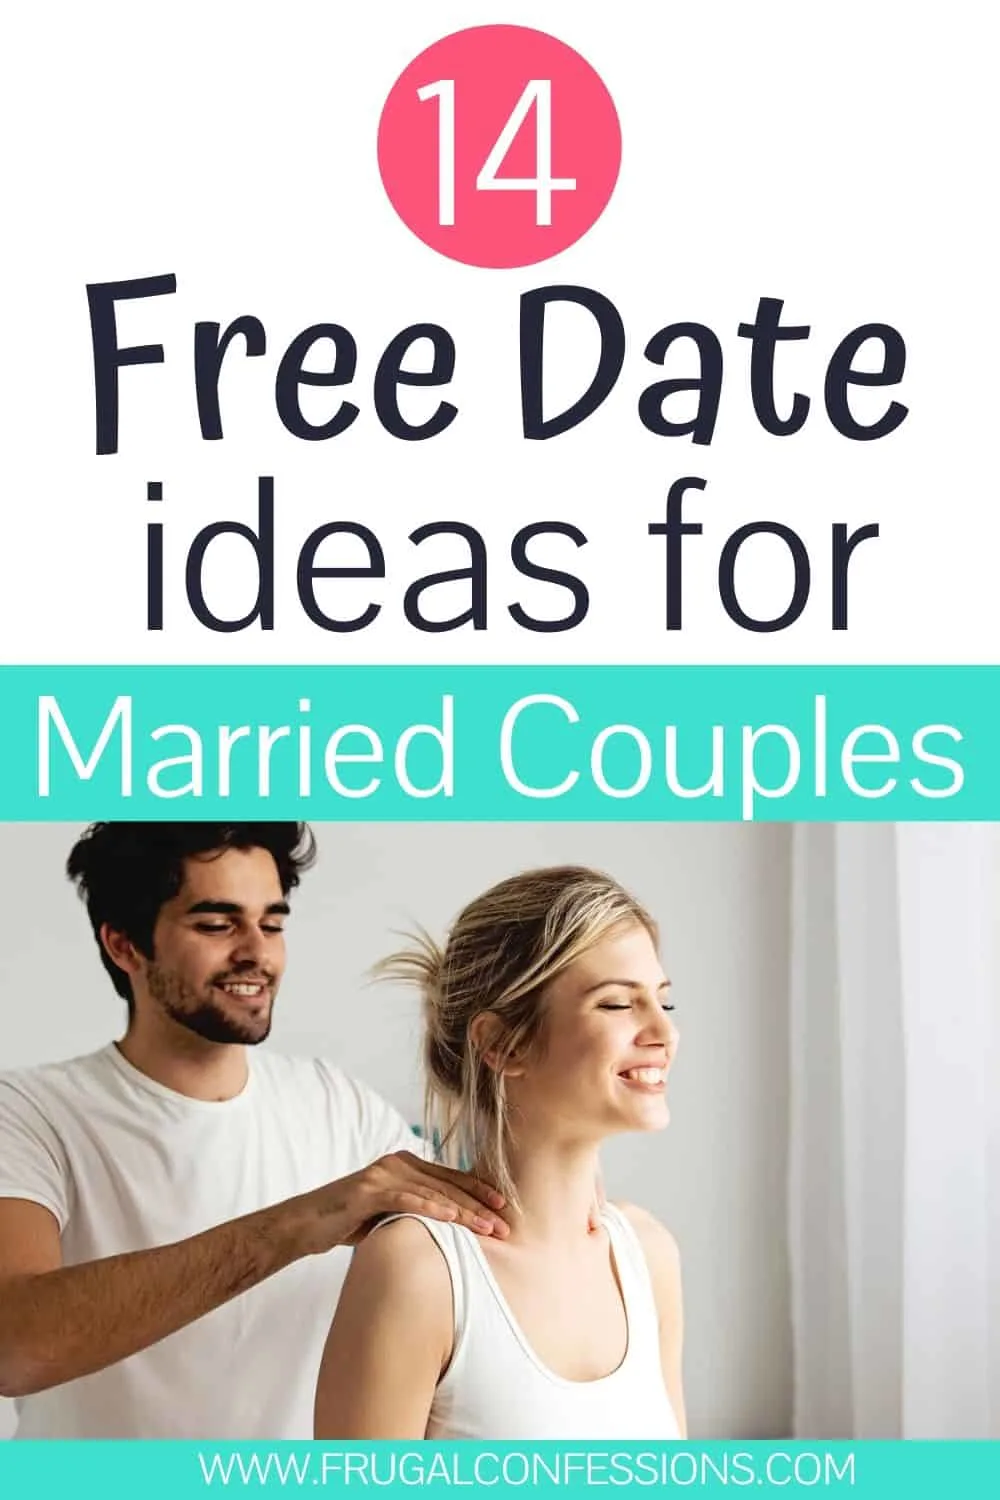 41 Free Date Ideas for Married Couples At Home (Romantic + Fun)